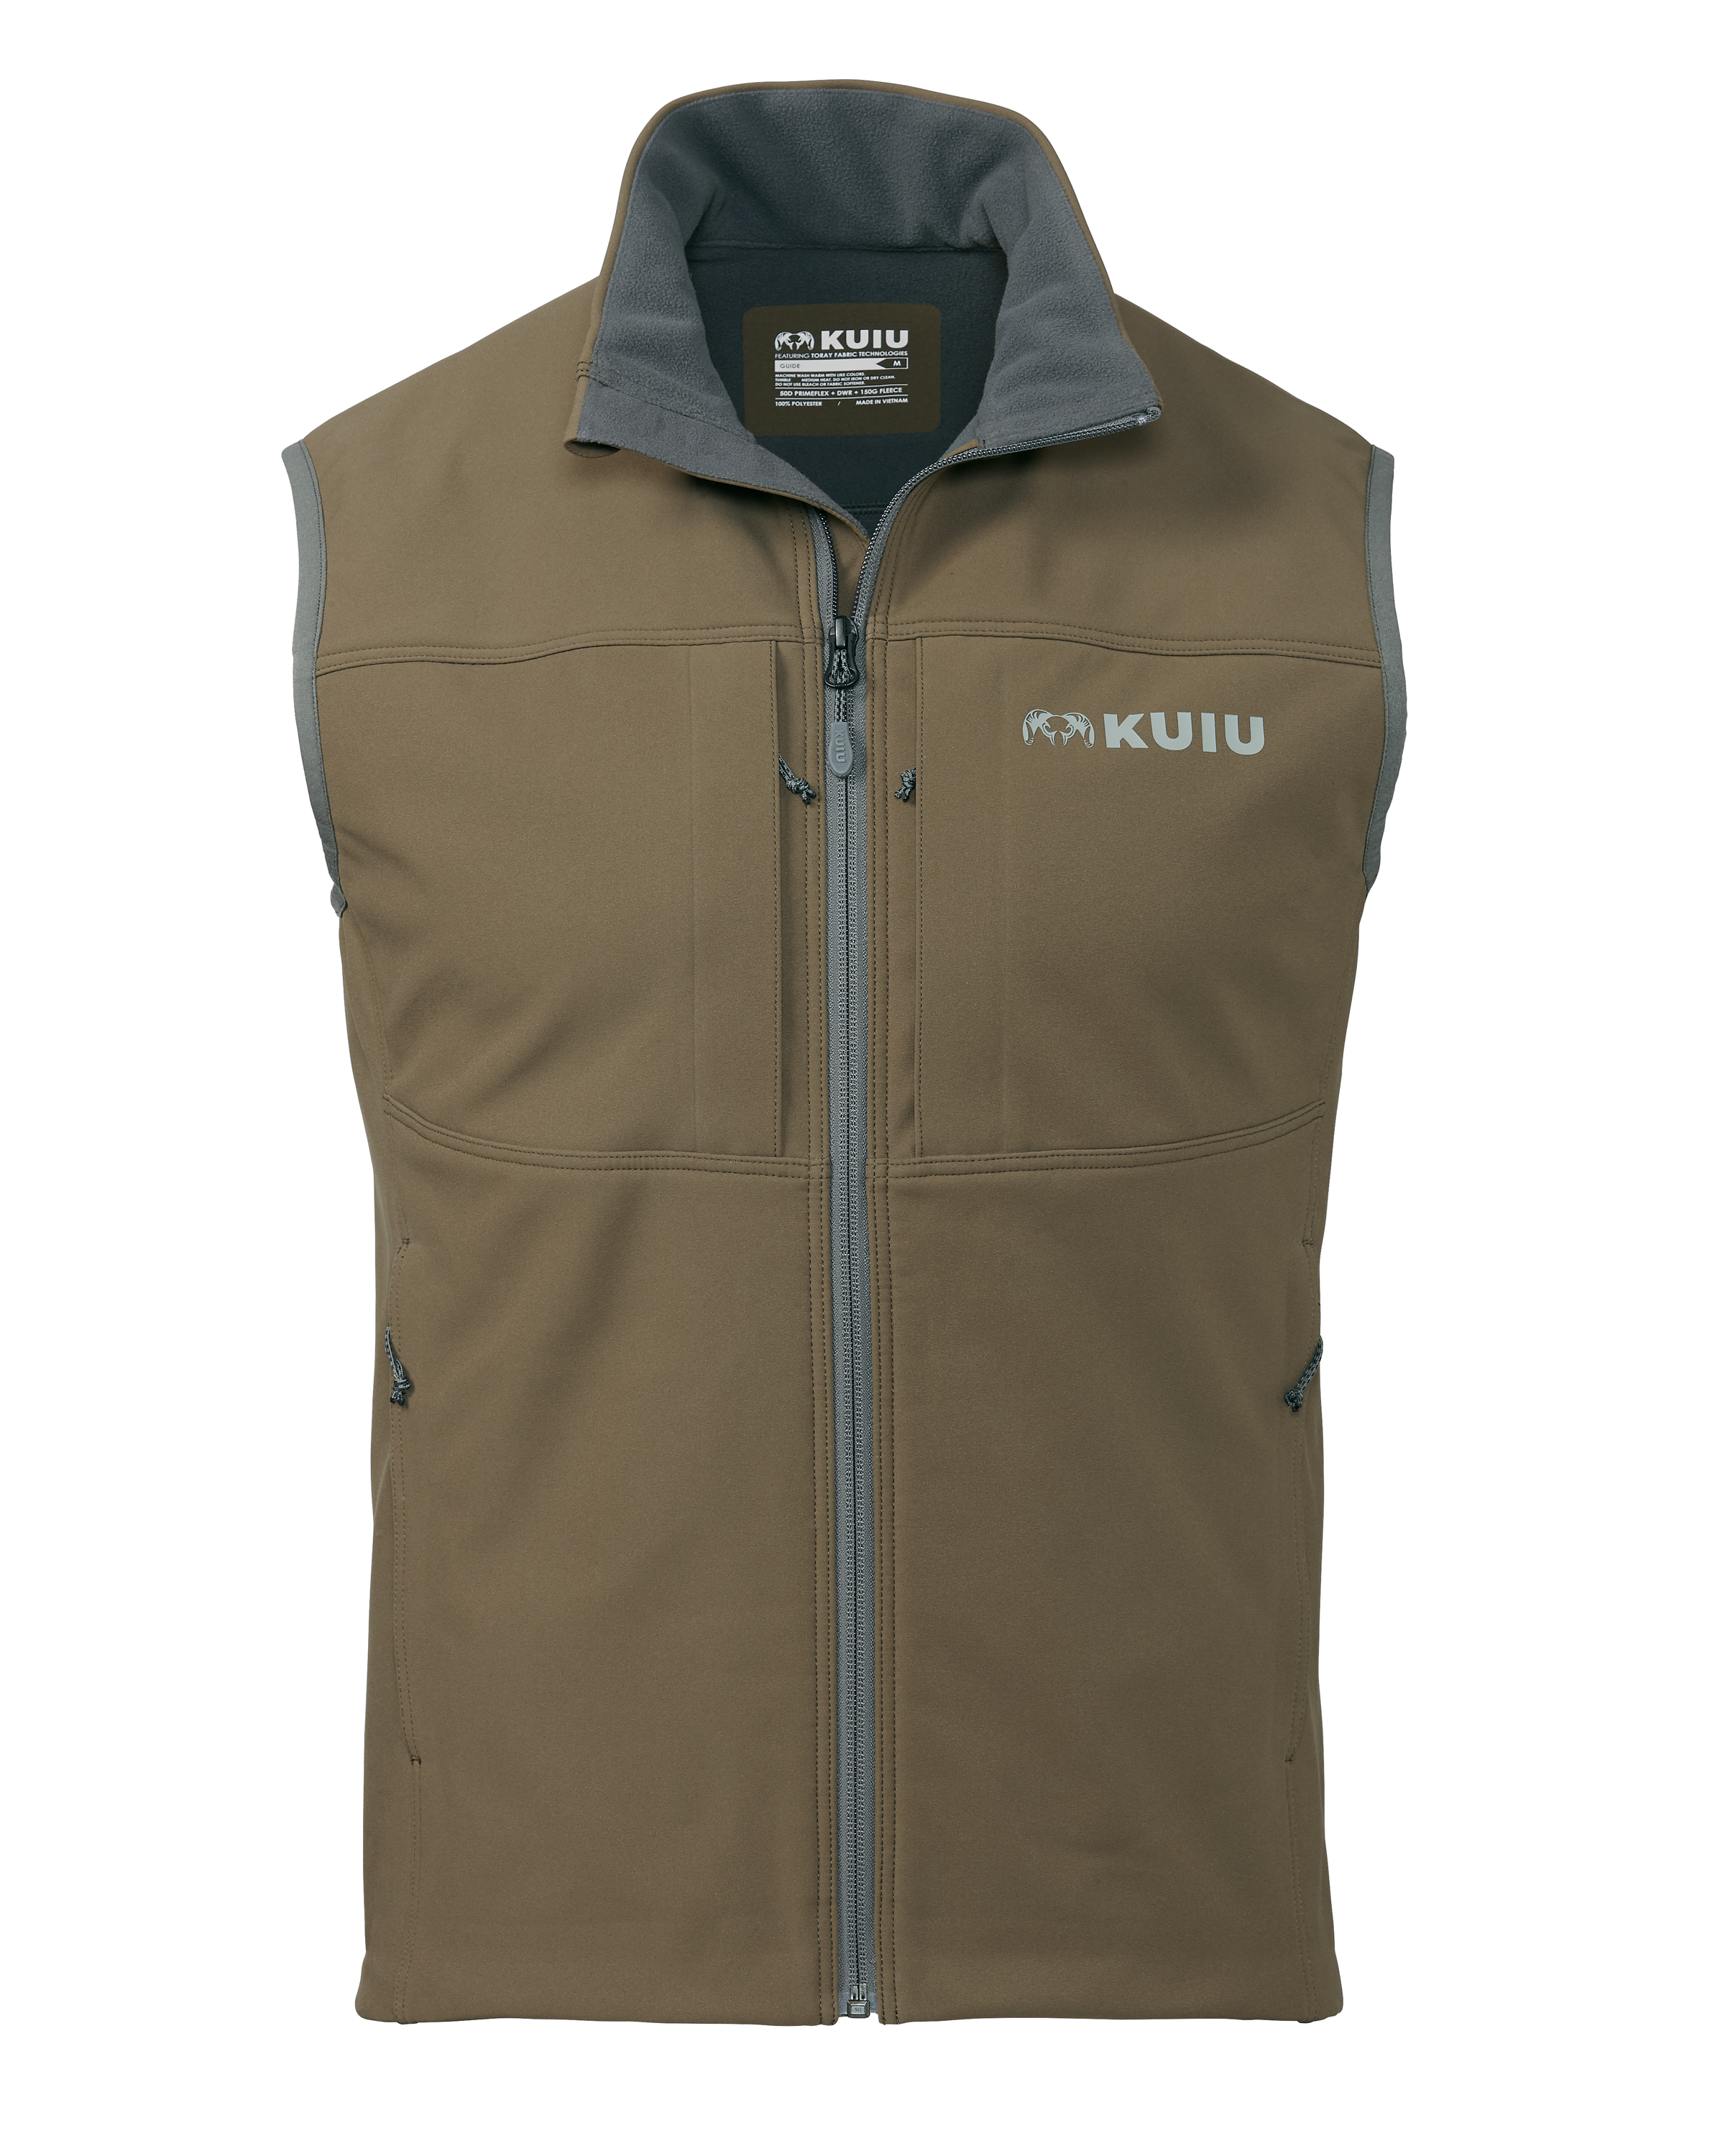 KUIU Guide DCS Hunting Vest in Bourbon | Size XL